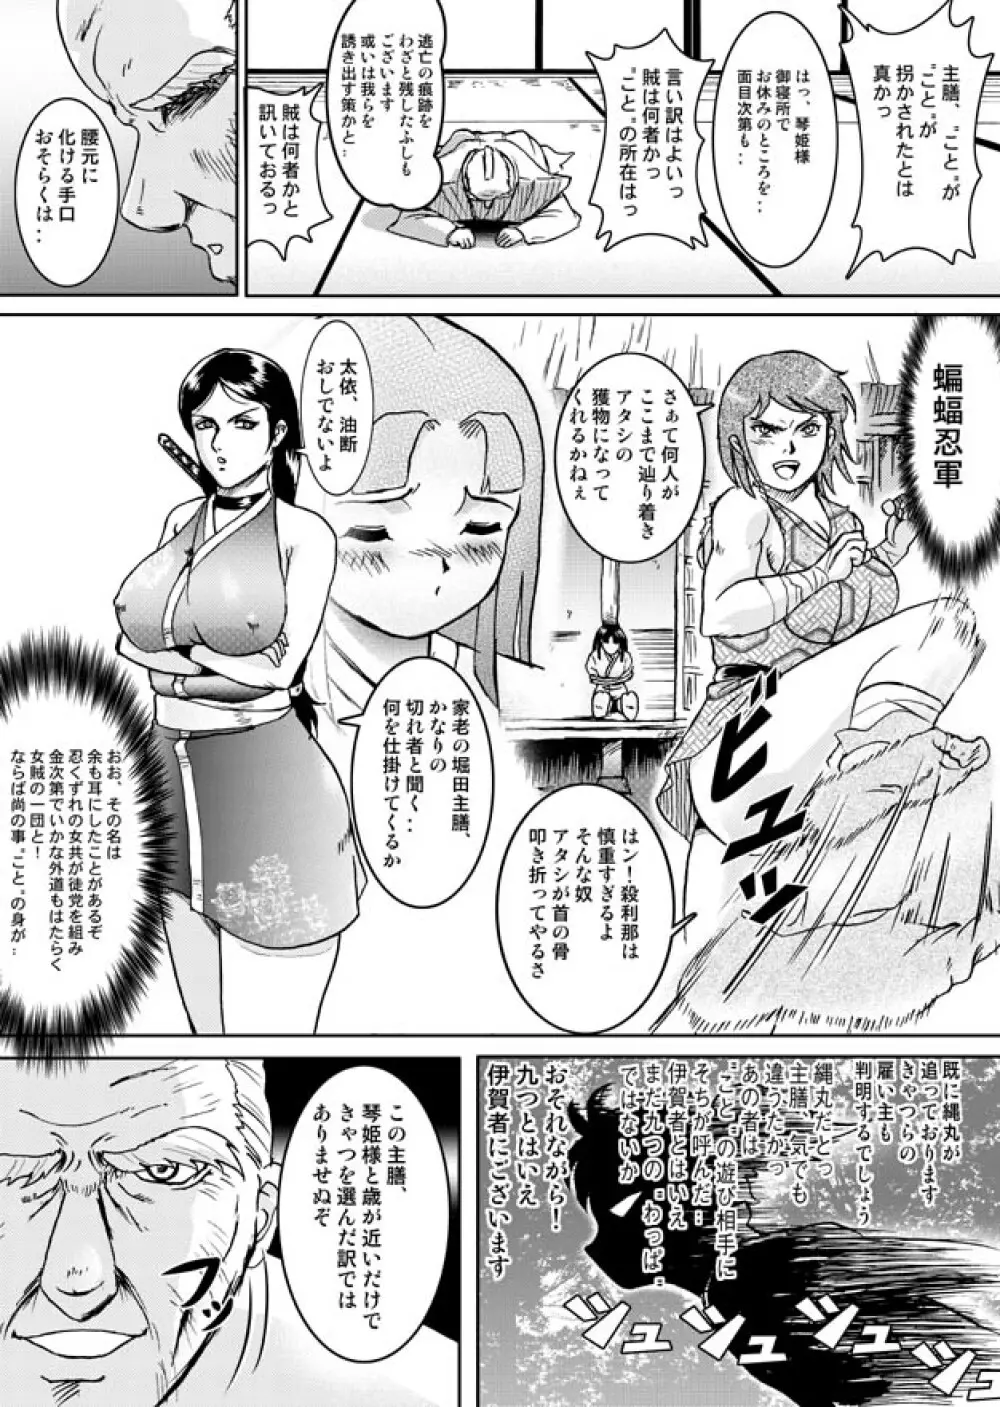 Same-themed manga about kid fighting female ninjas from japanese imageboard. Page.2